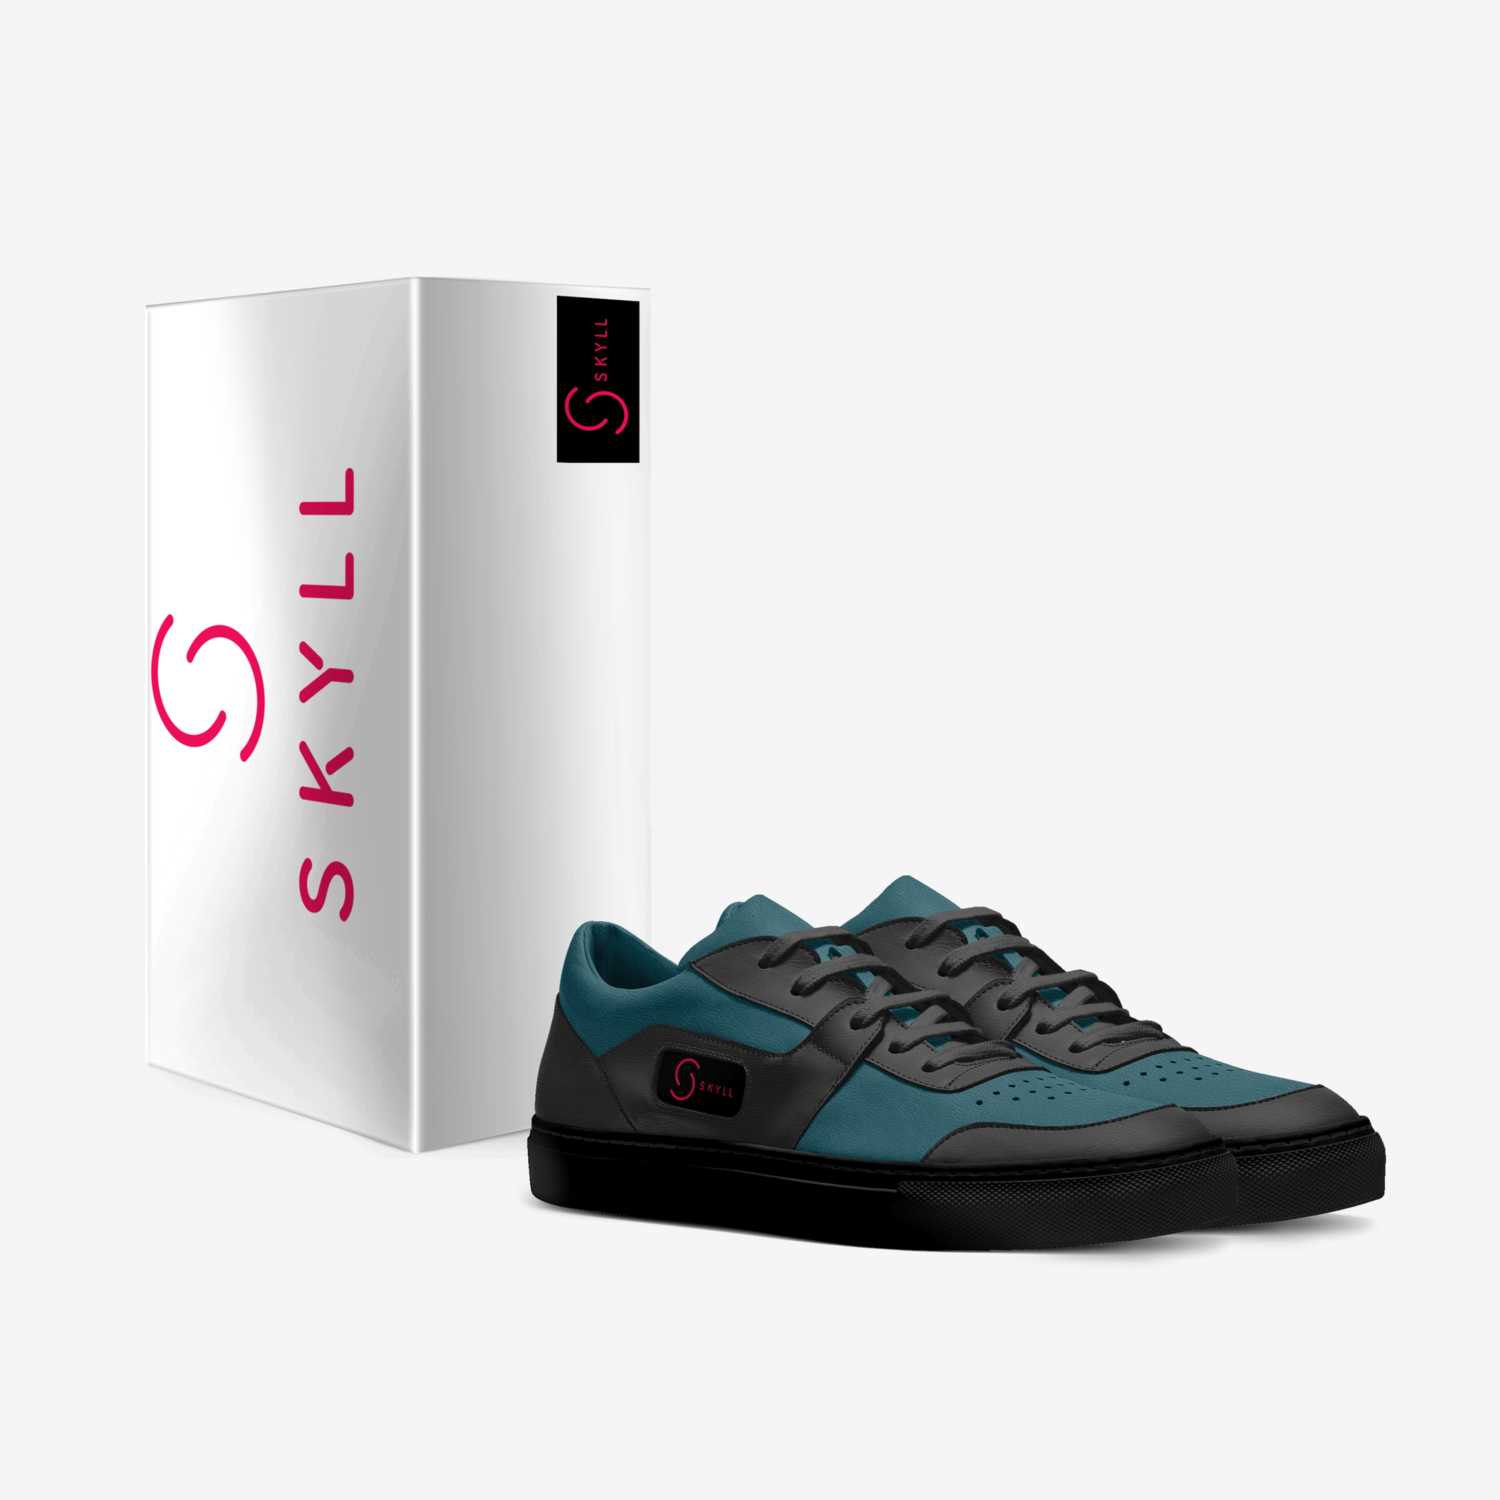 Marsouille custom made in Italy shoes by Skyll Lamine | Box view